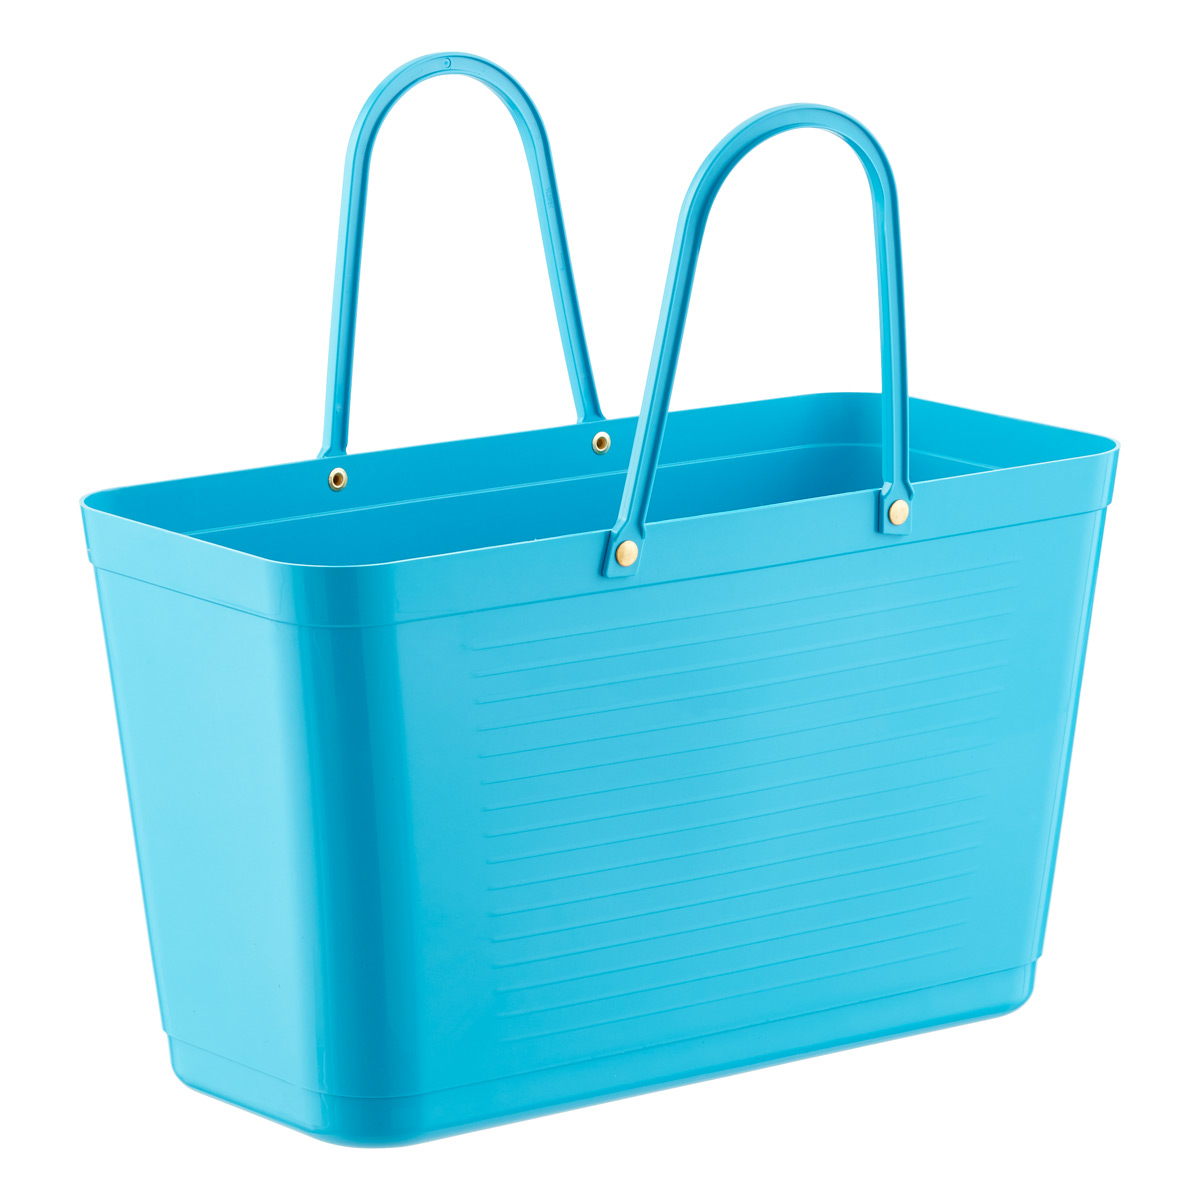 Hinza Shopping Totes | The Container Store